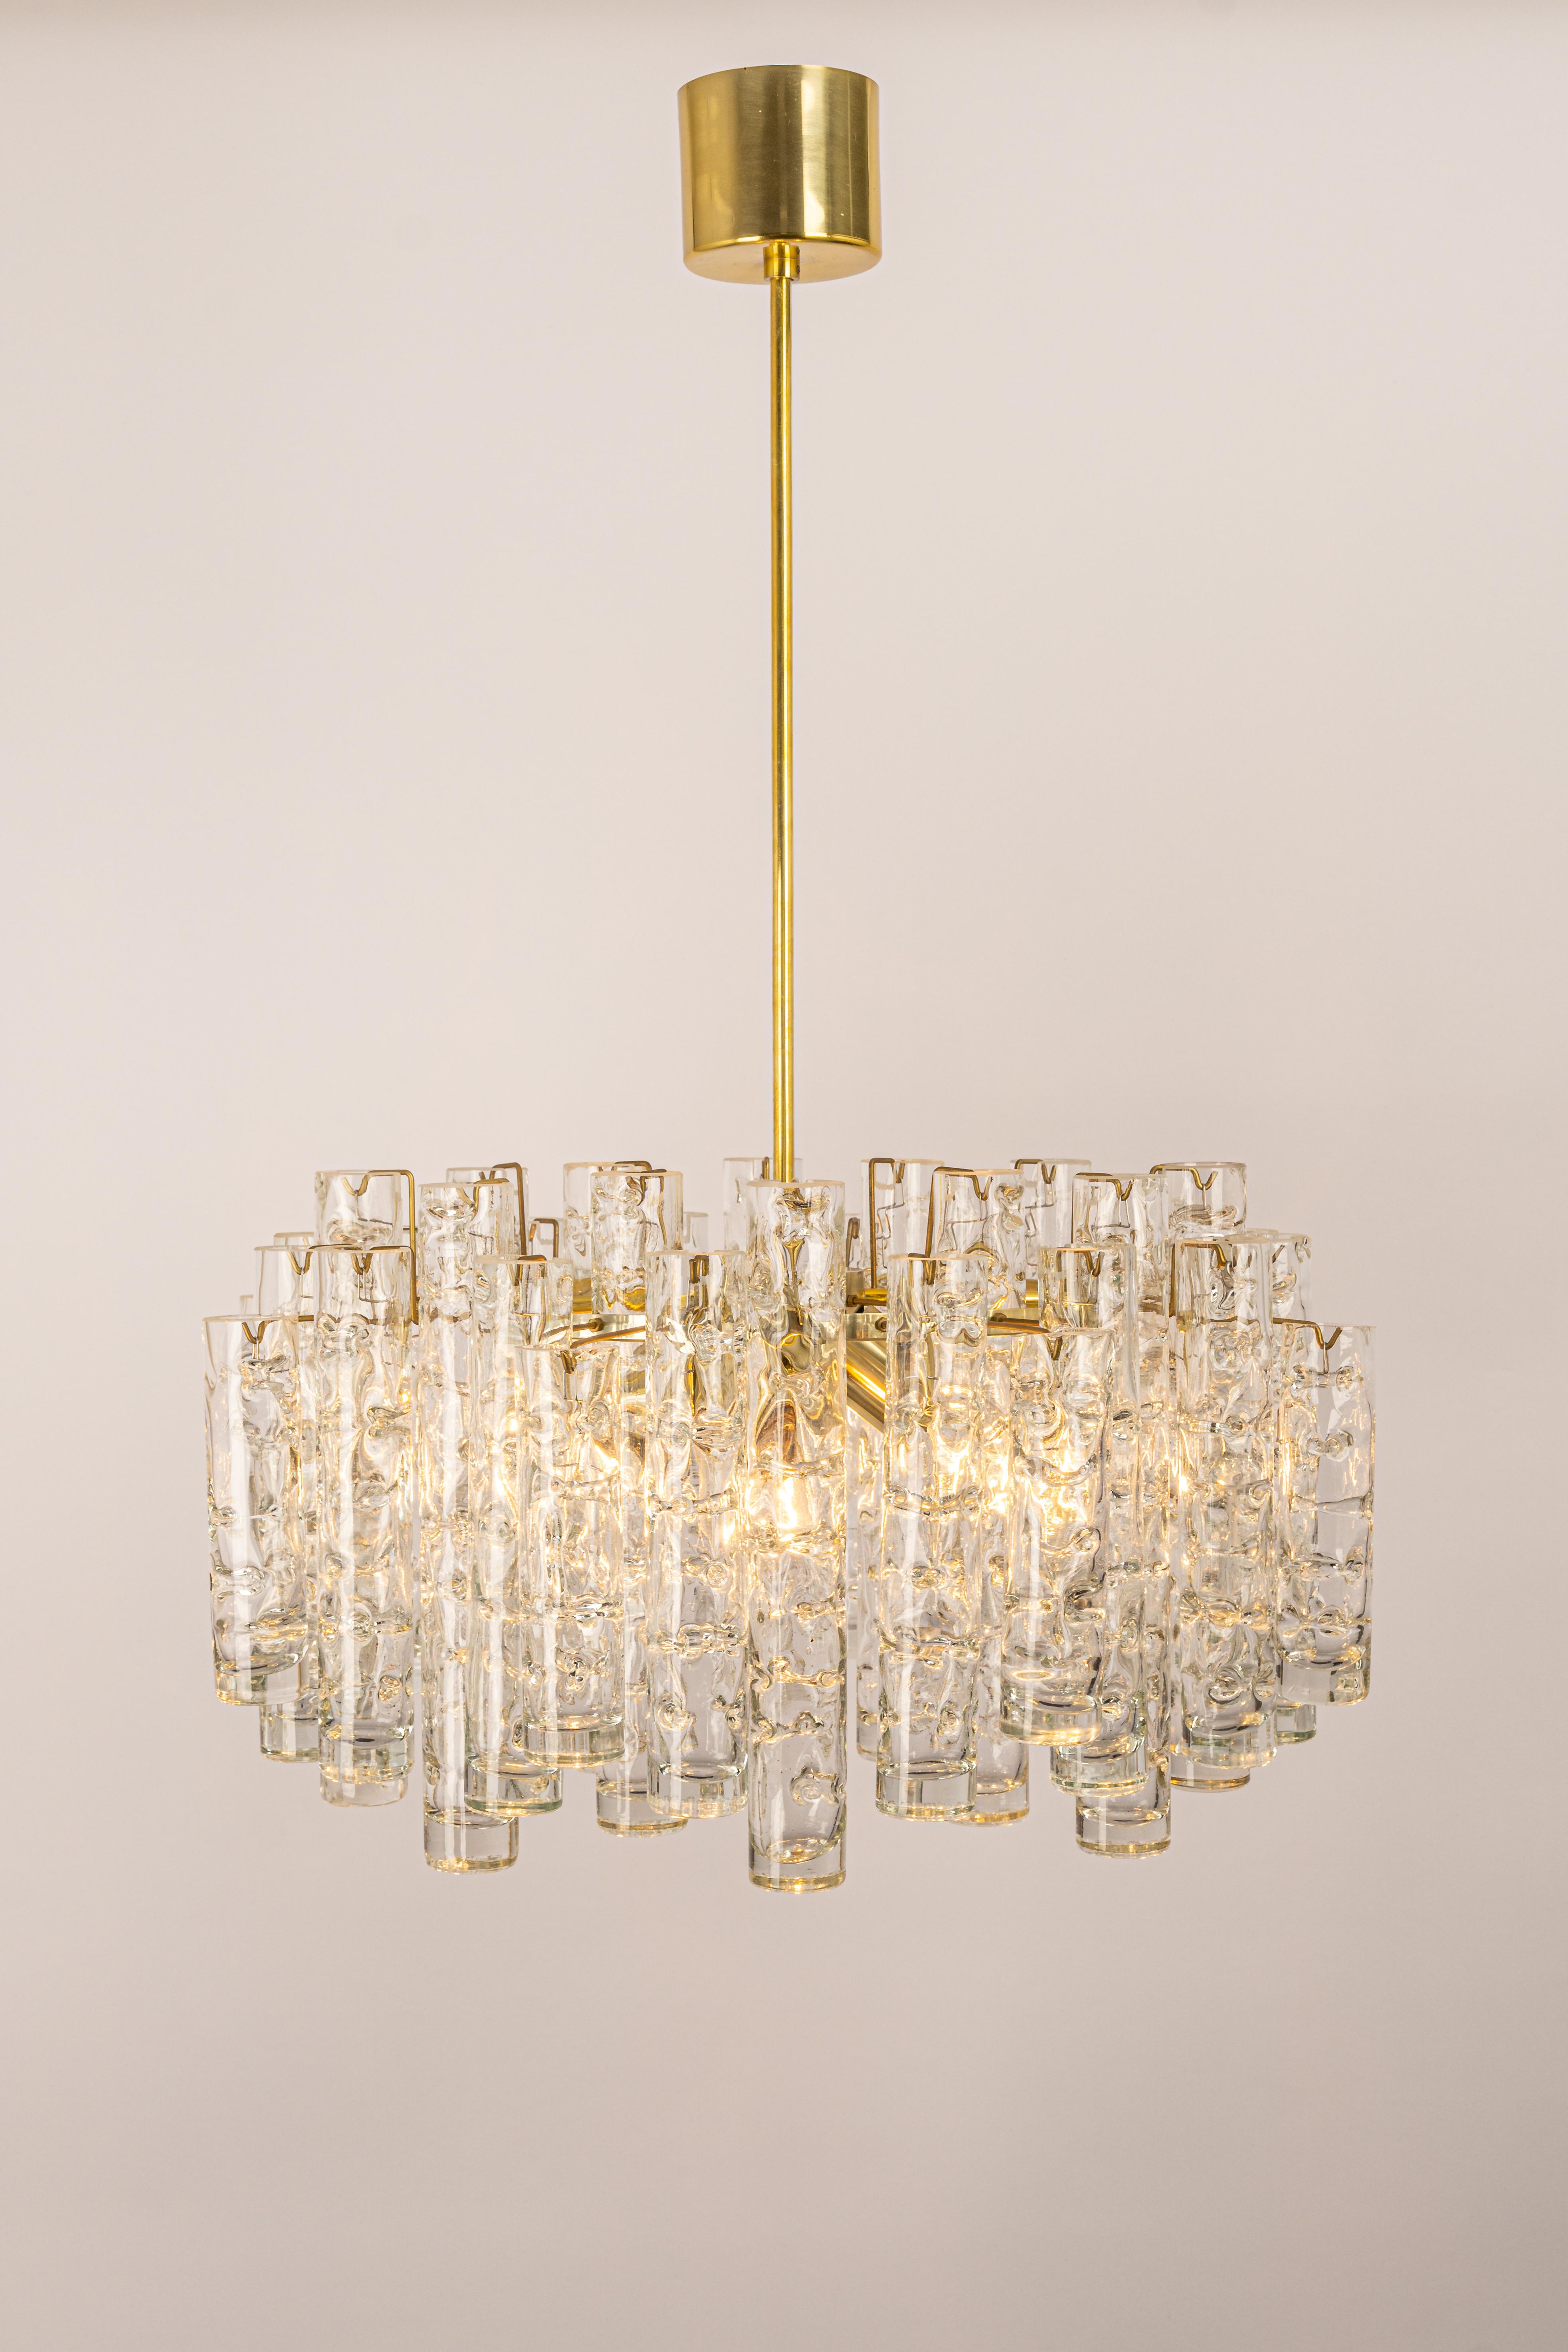 Brass 1 of 4 Stunning Murano Glass Tubes Chandelier by Doria, Germany, 1960s For Sale